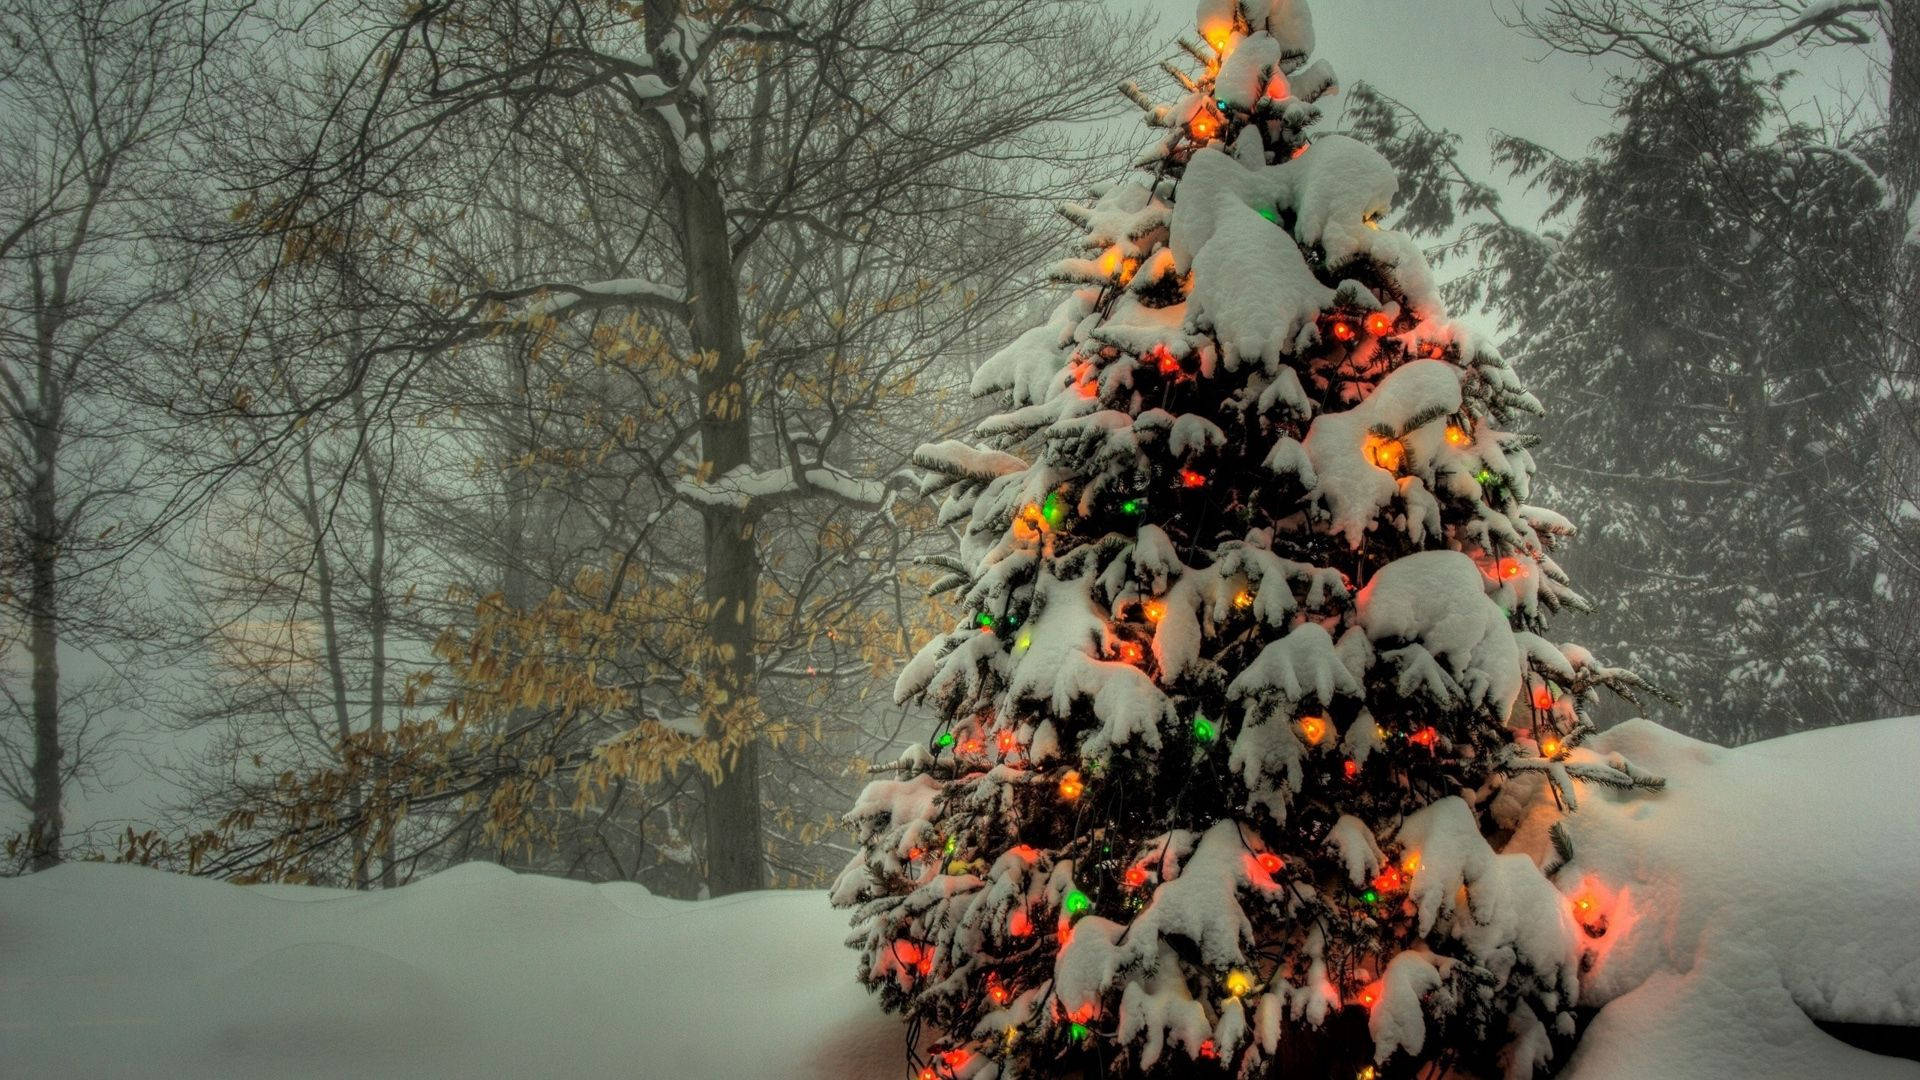 Snow covered tree with orange and green Christmas lights wallpaper.